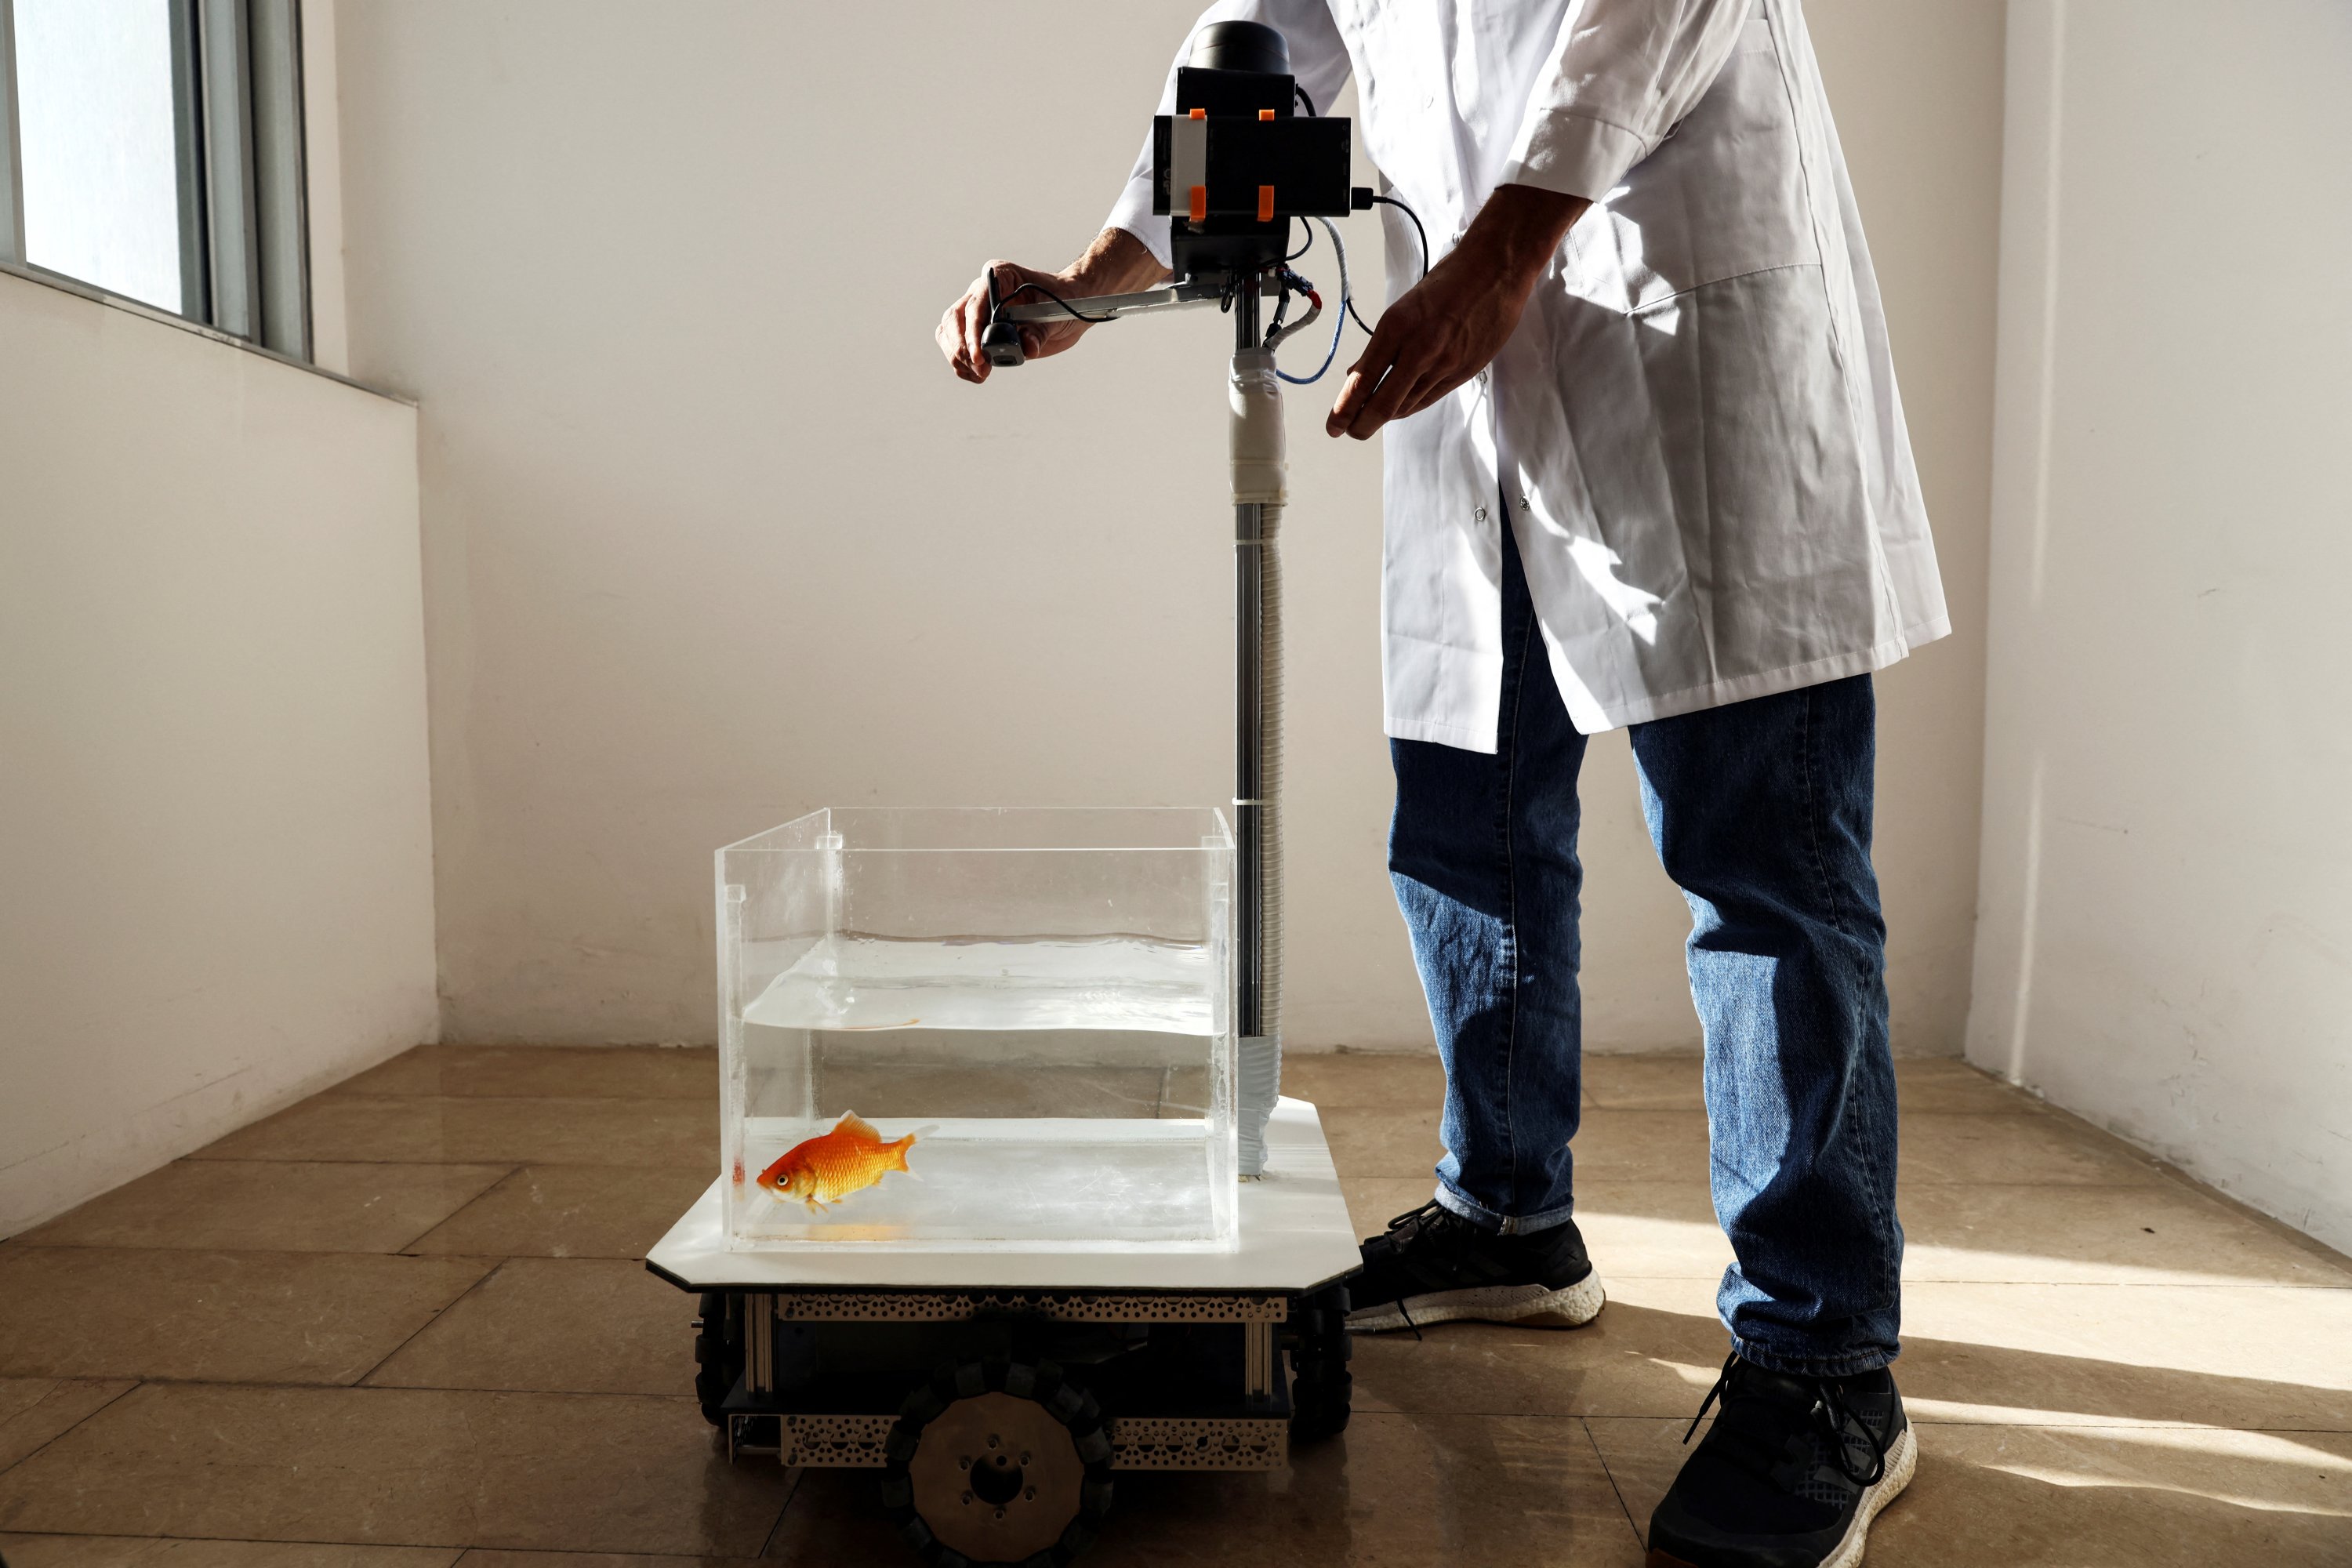 A researcher adjusts a fish-operated vehicle navigated by a goldfish, developed at Ben-Gurion University in Beersheba, Israel, Jan. 6, 2022. (Reuters Photo) 